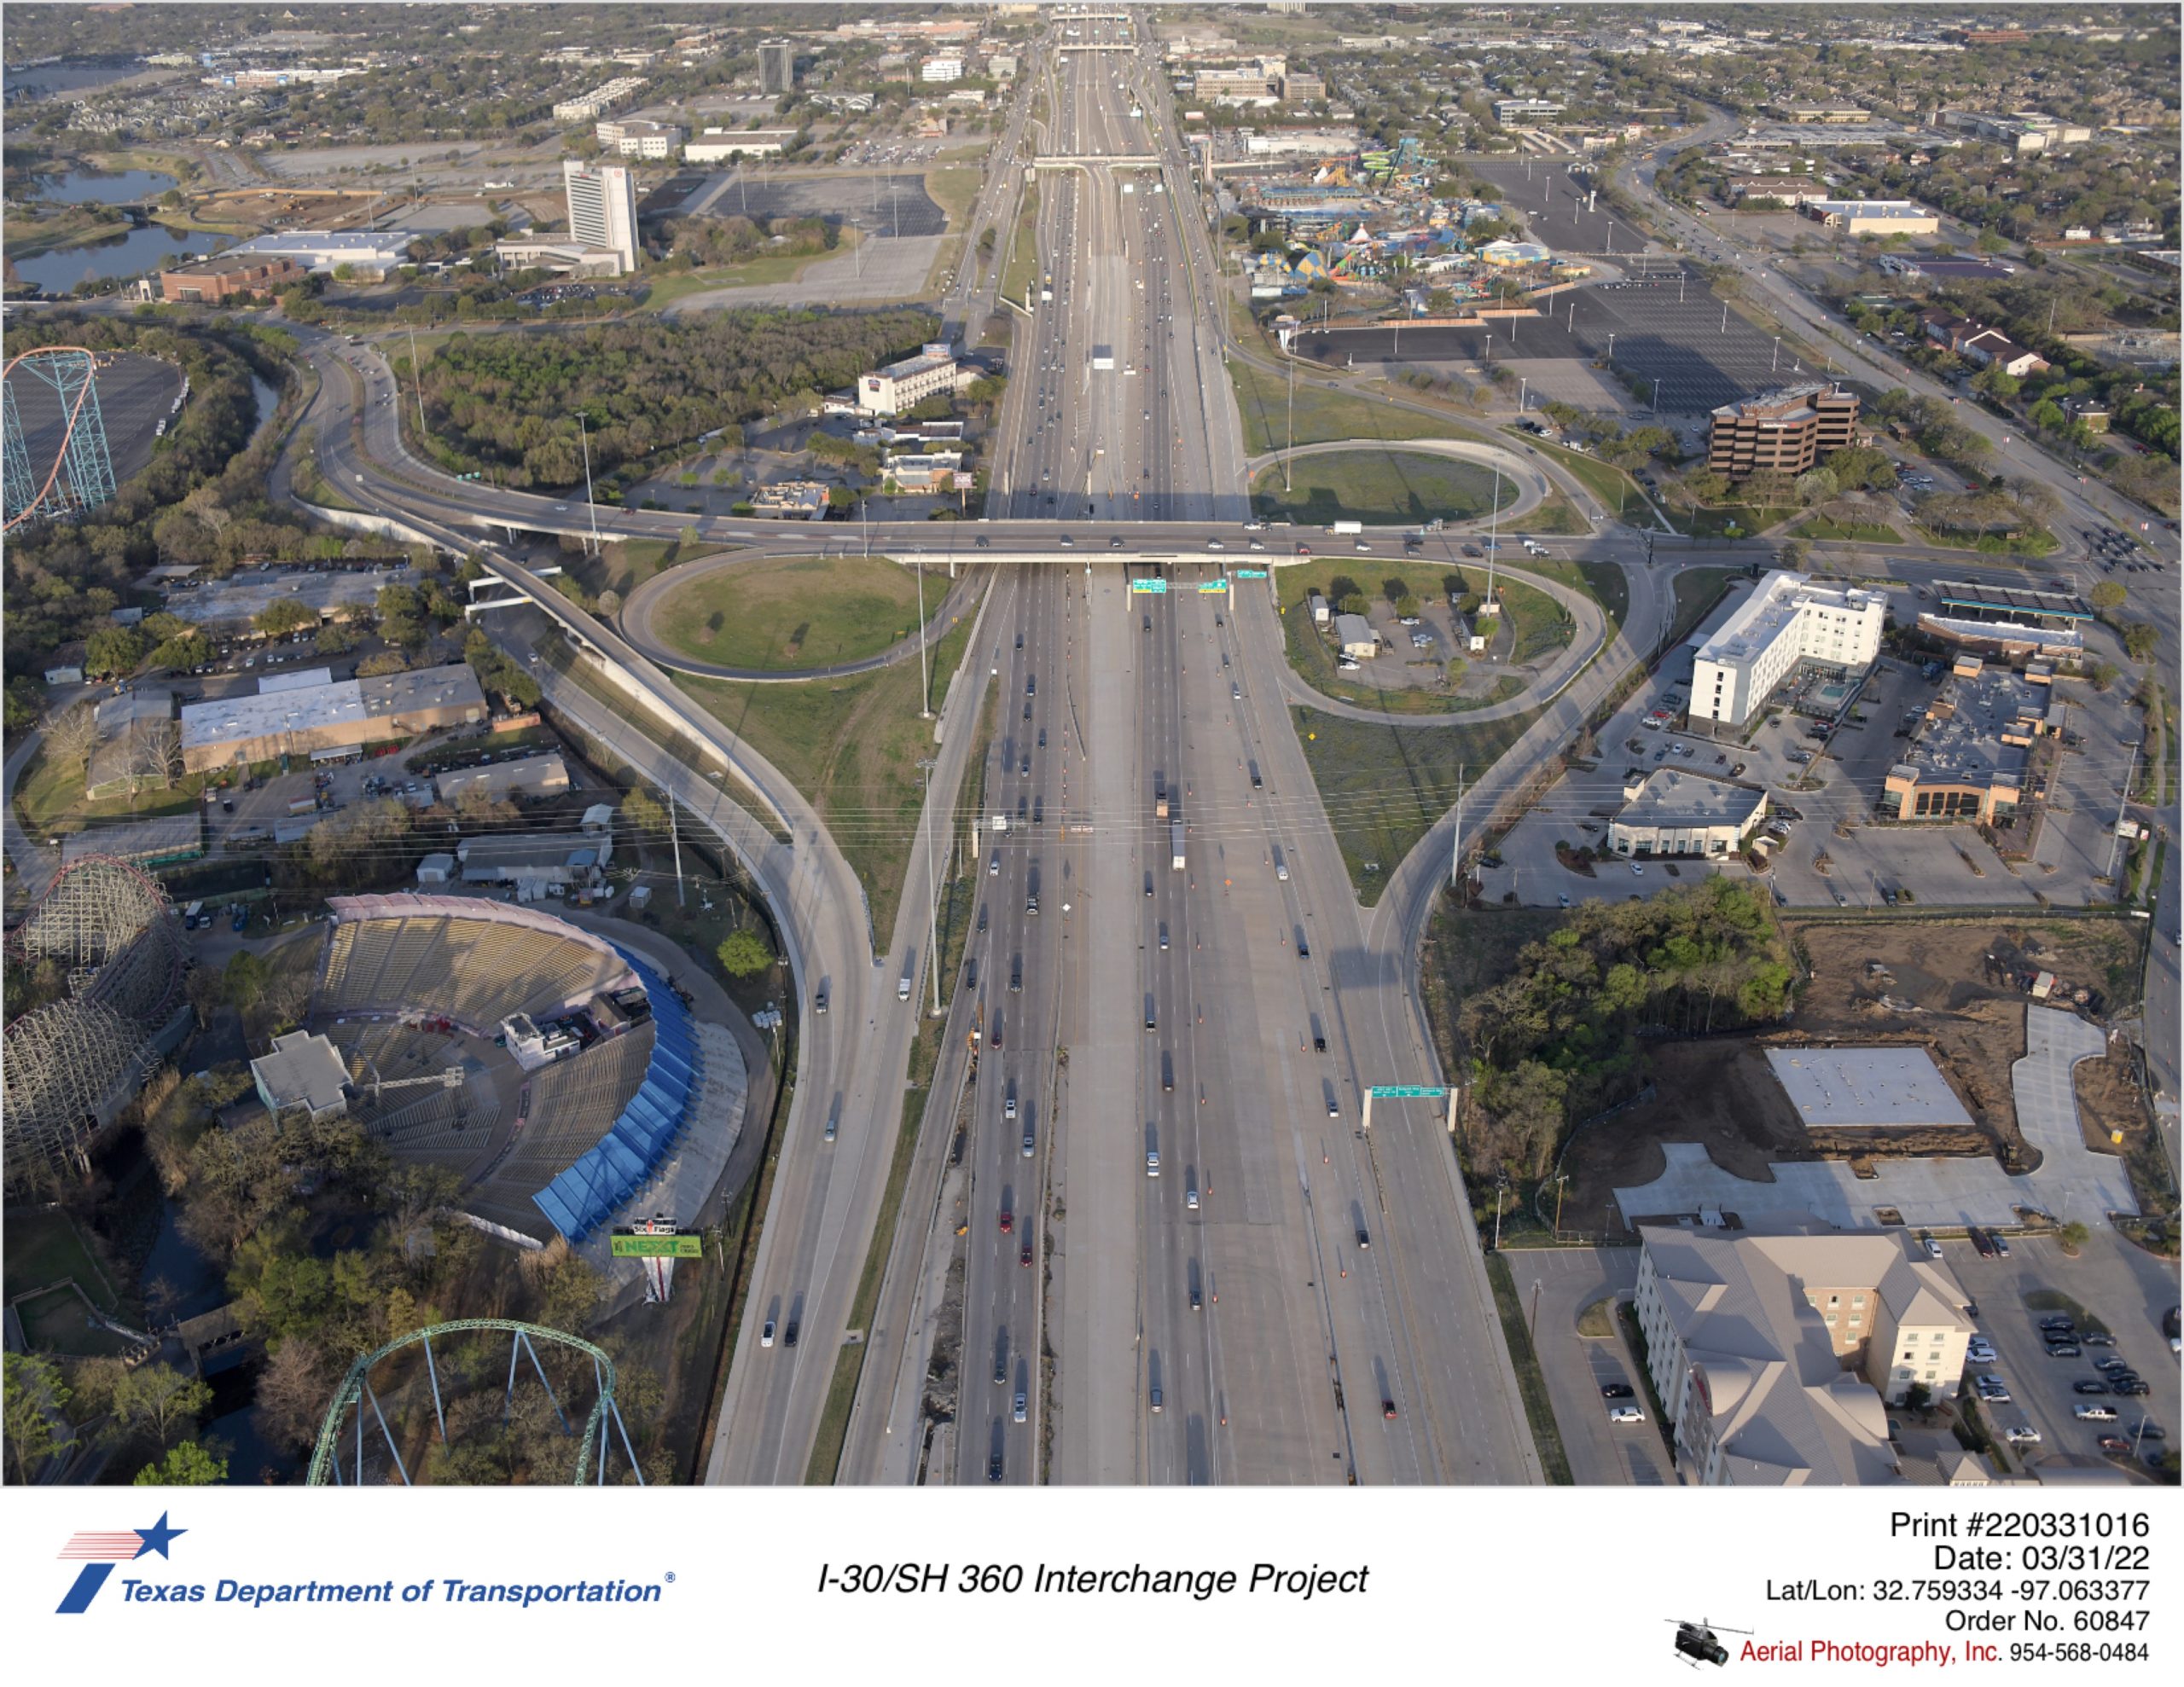 I-30 looking west with Ballpark Way interchange in mid-ground.